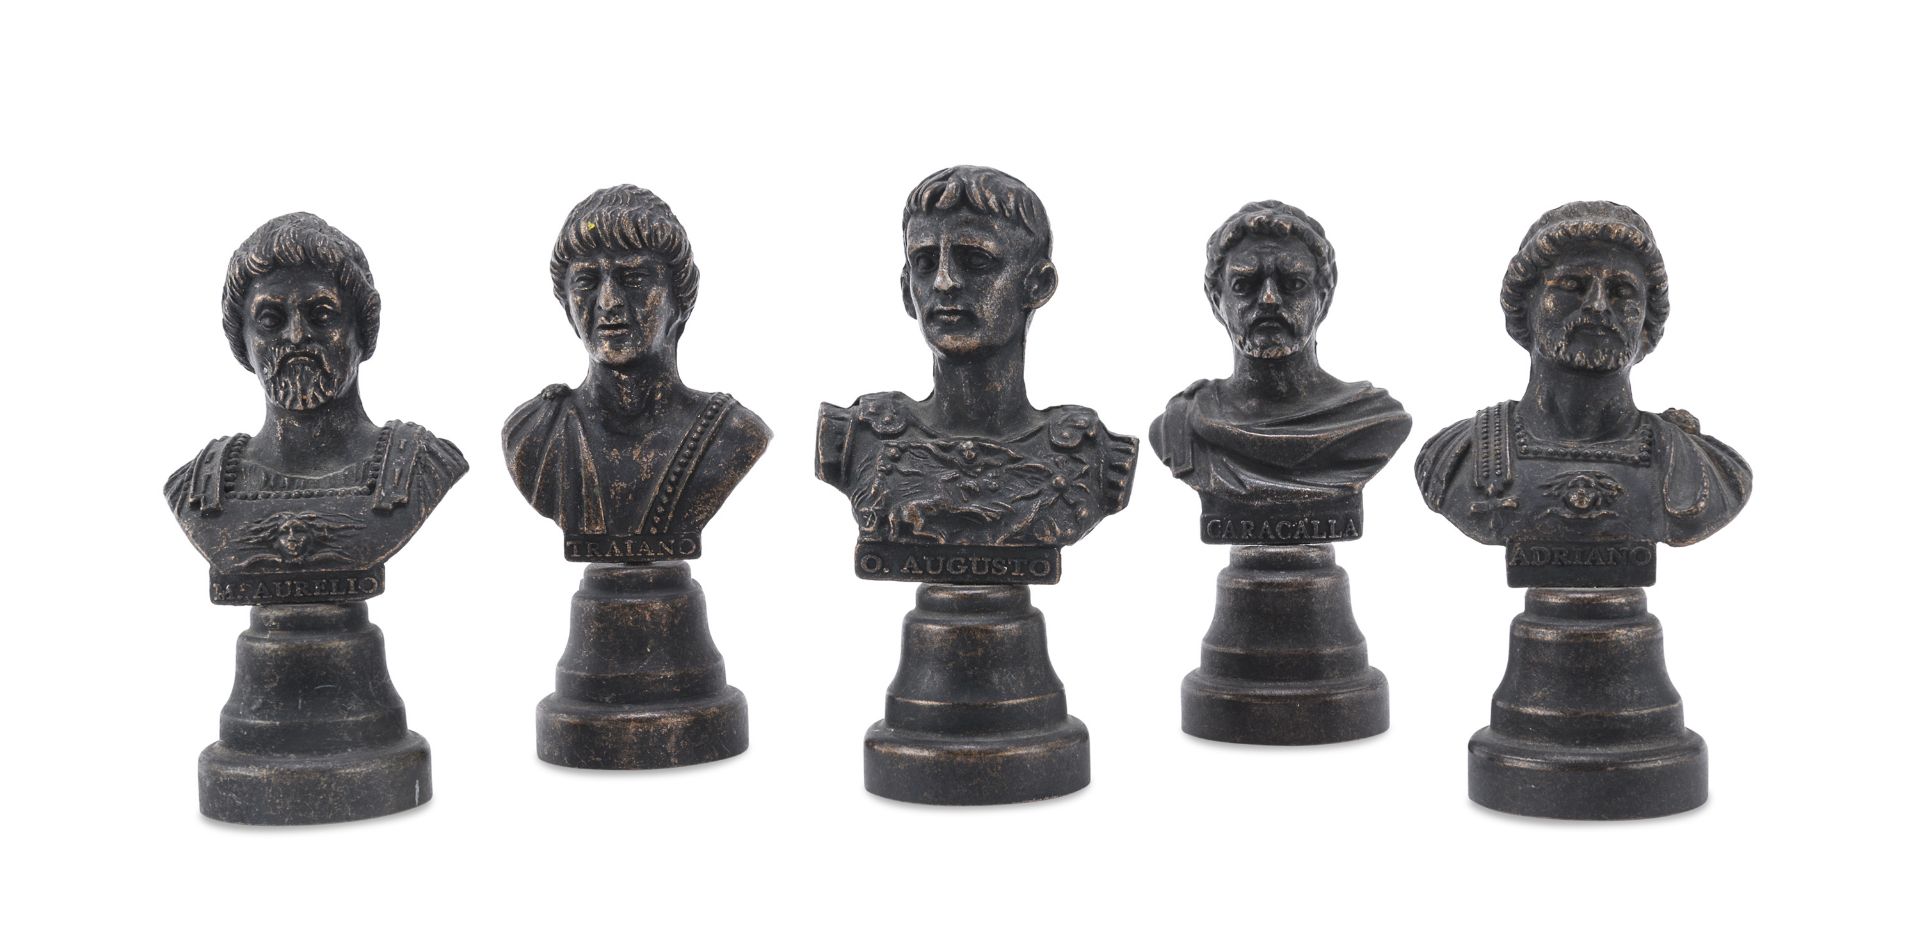 FIVE MIGNON BUSTS LATE 19TH CENTURY